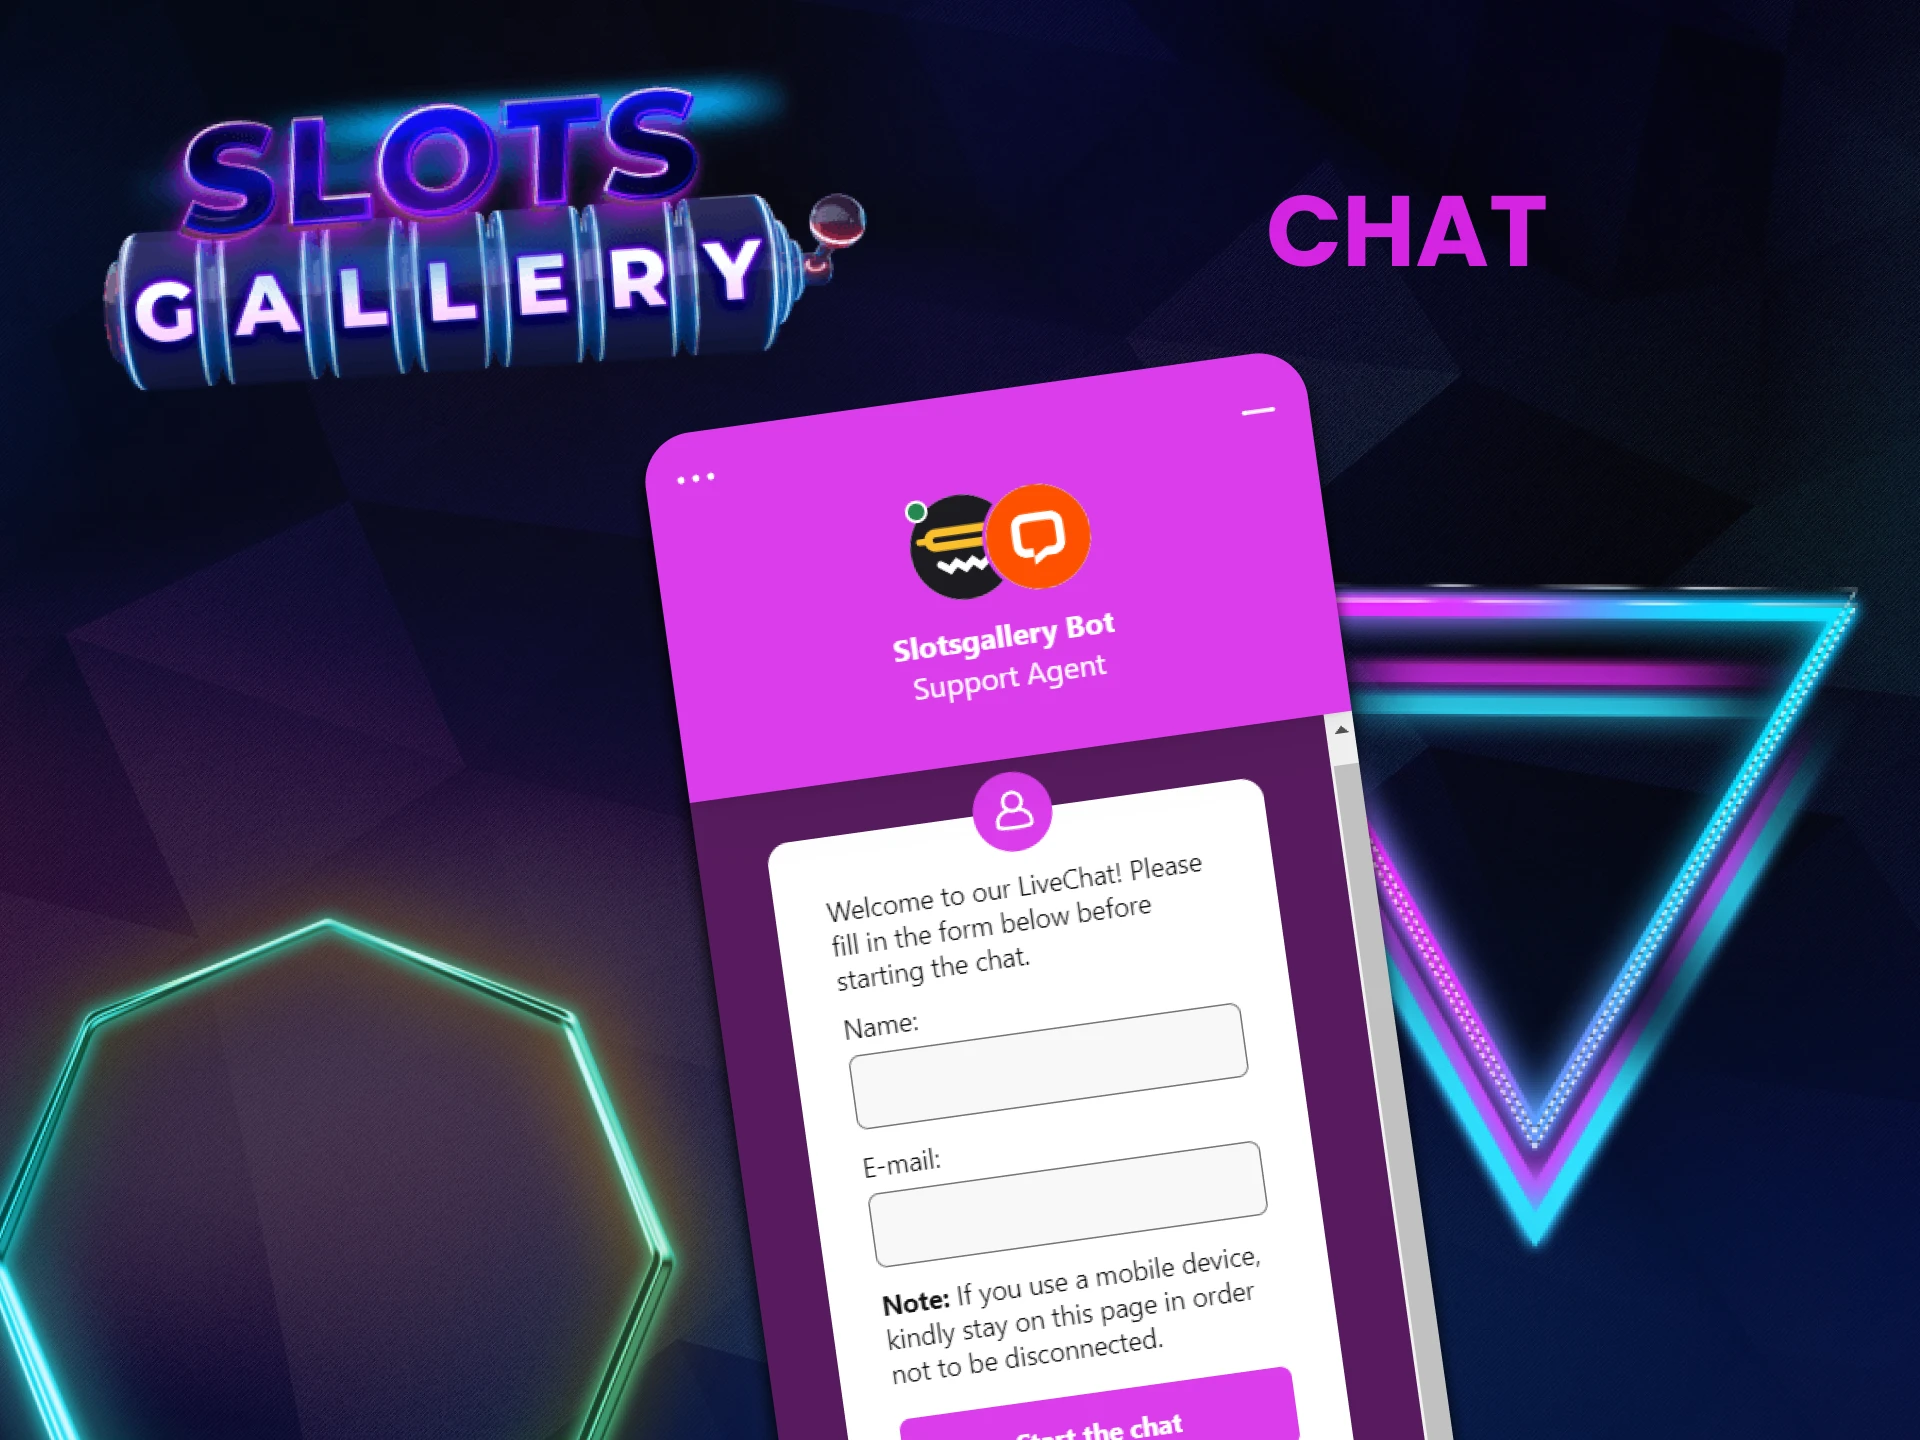 You can contact the Slots Gallery team via chat.